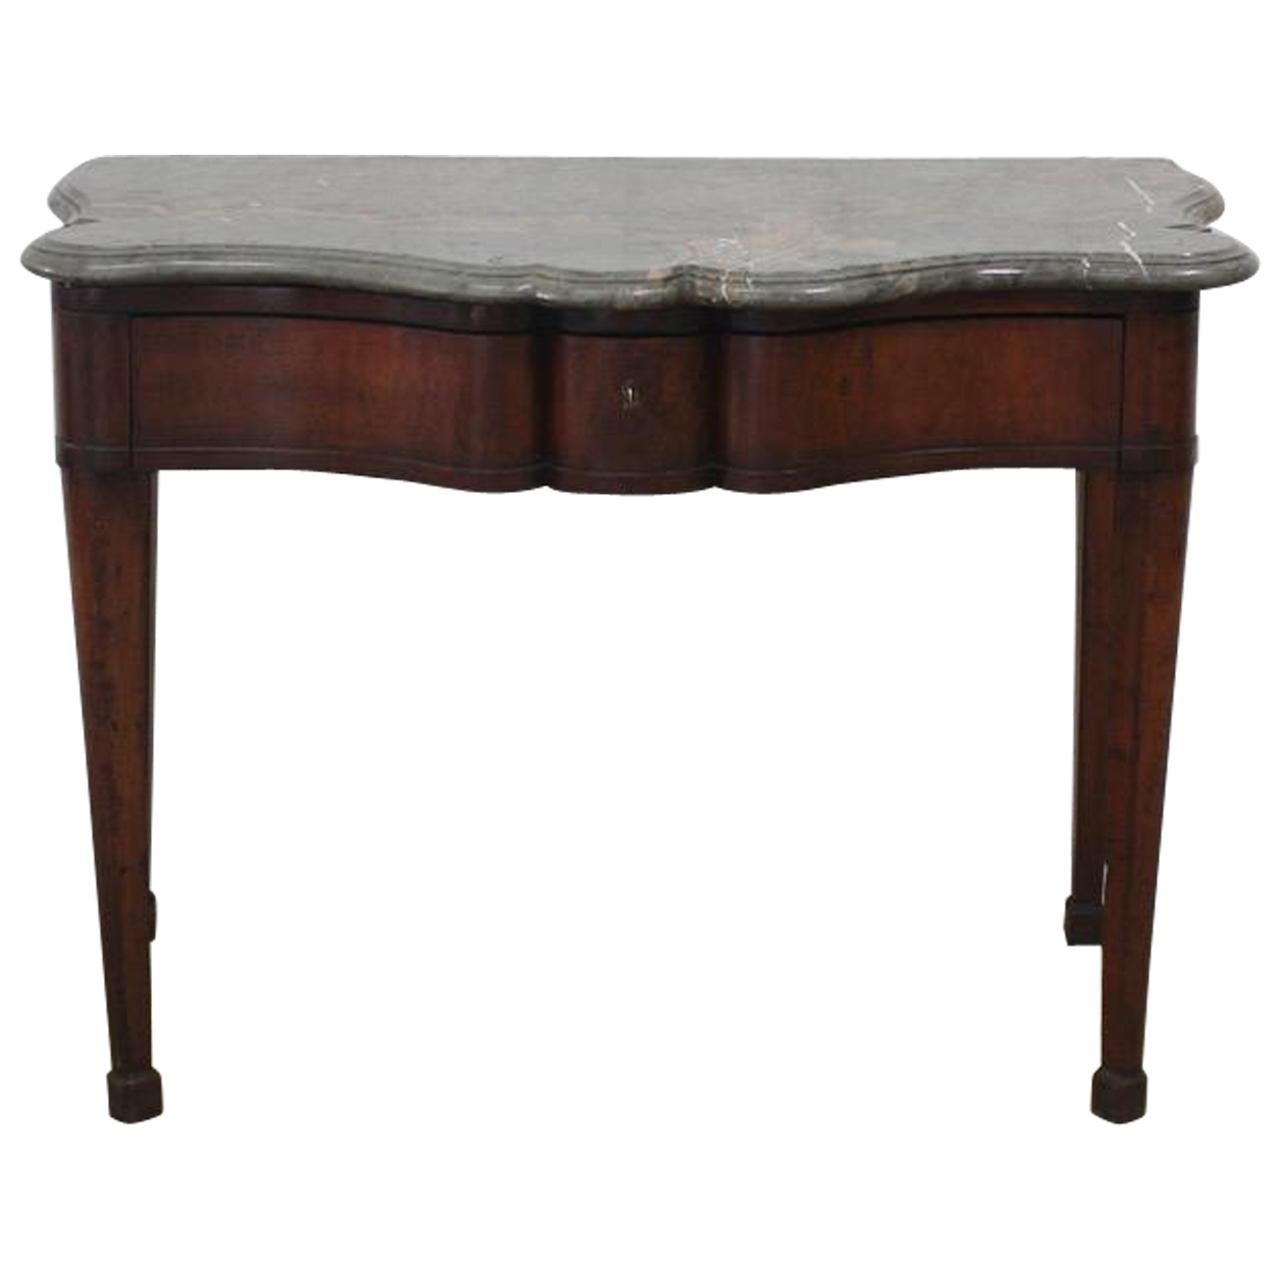 Early 19th Century Italian Mahogany Serpentine Console Table For Sale